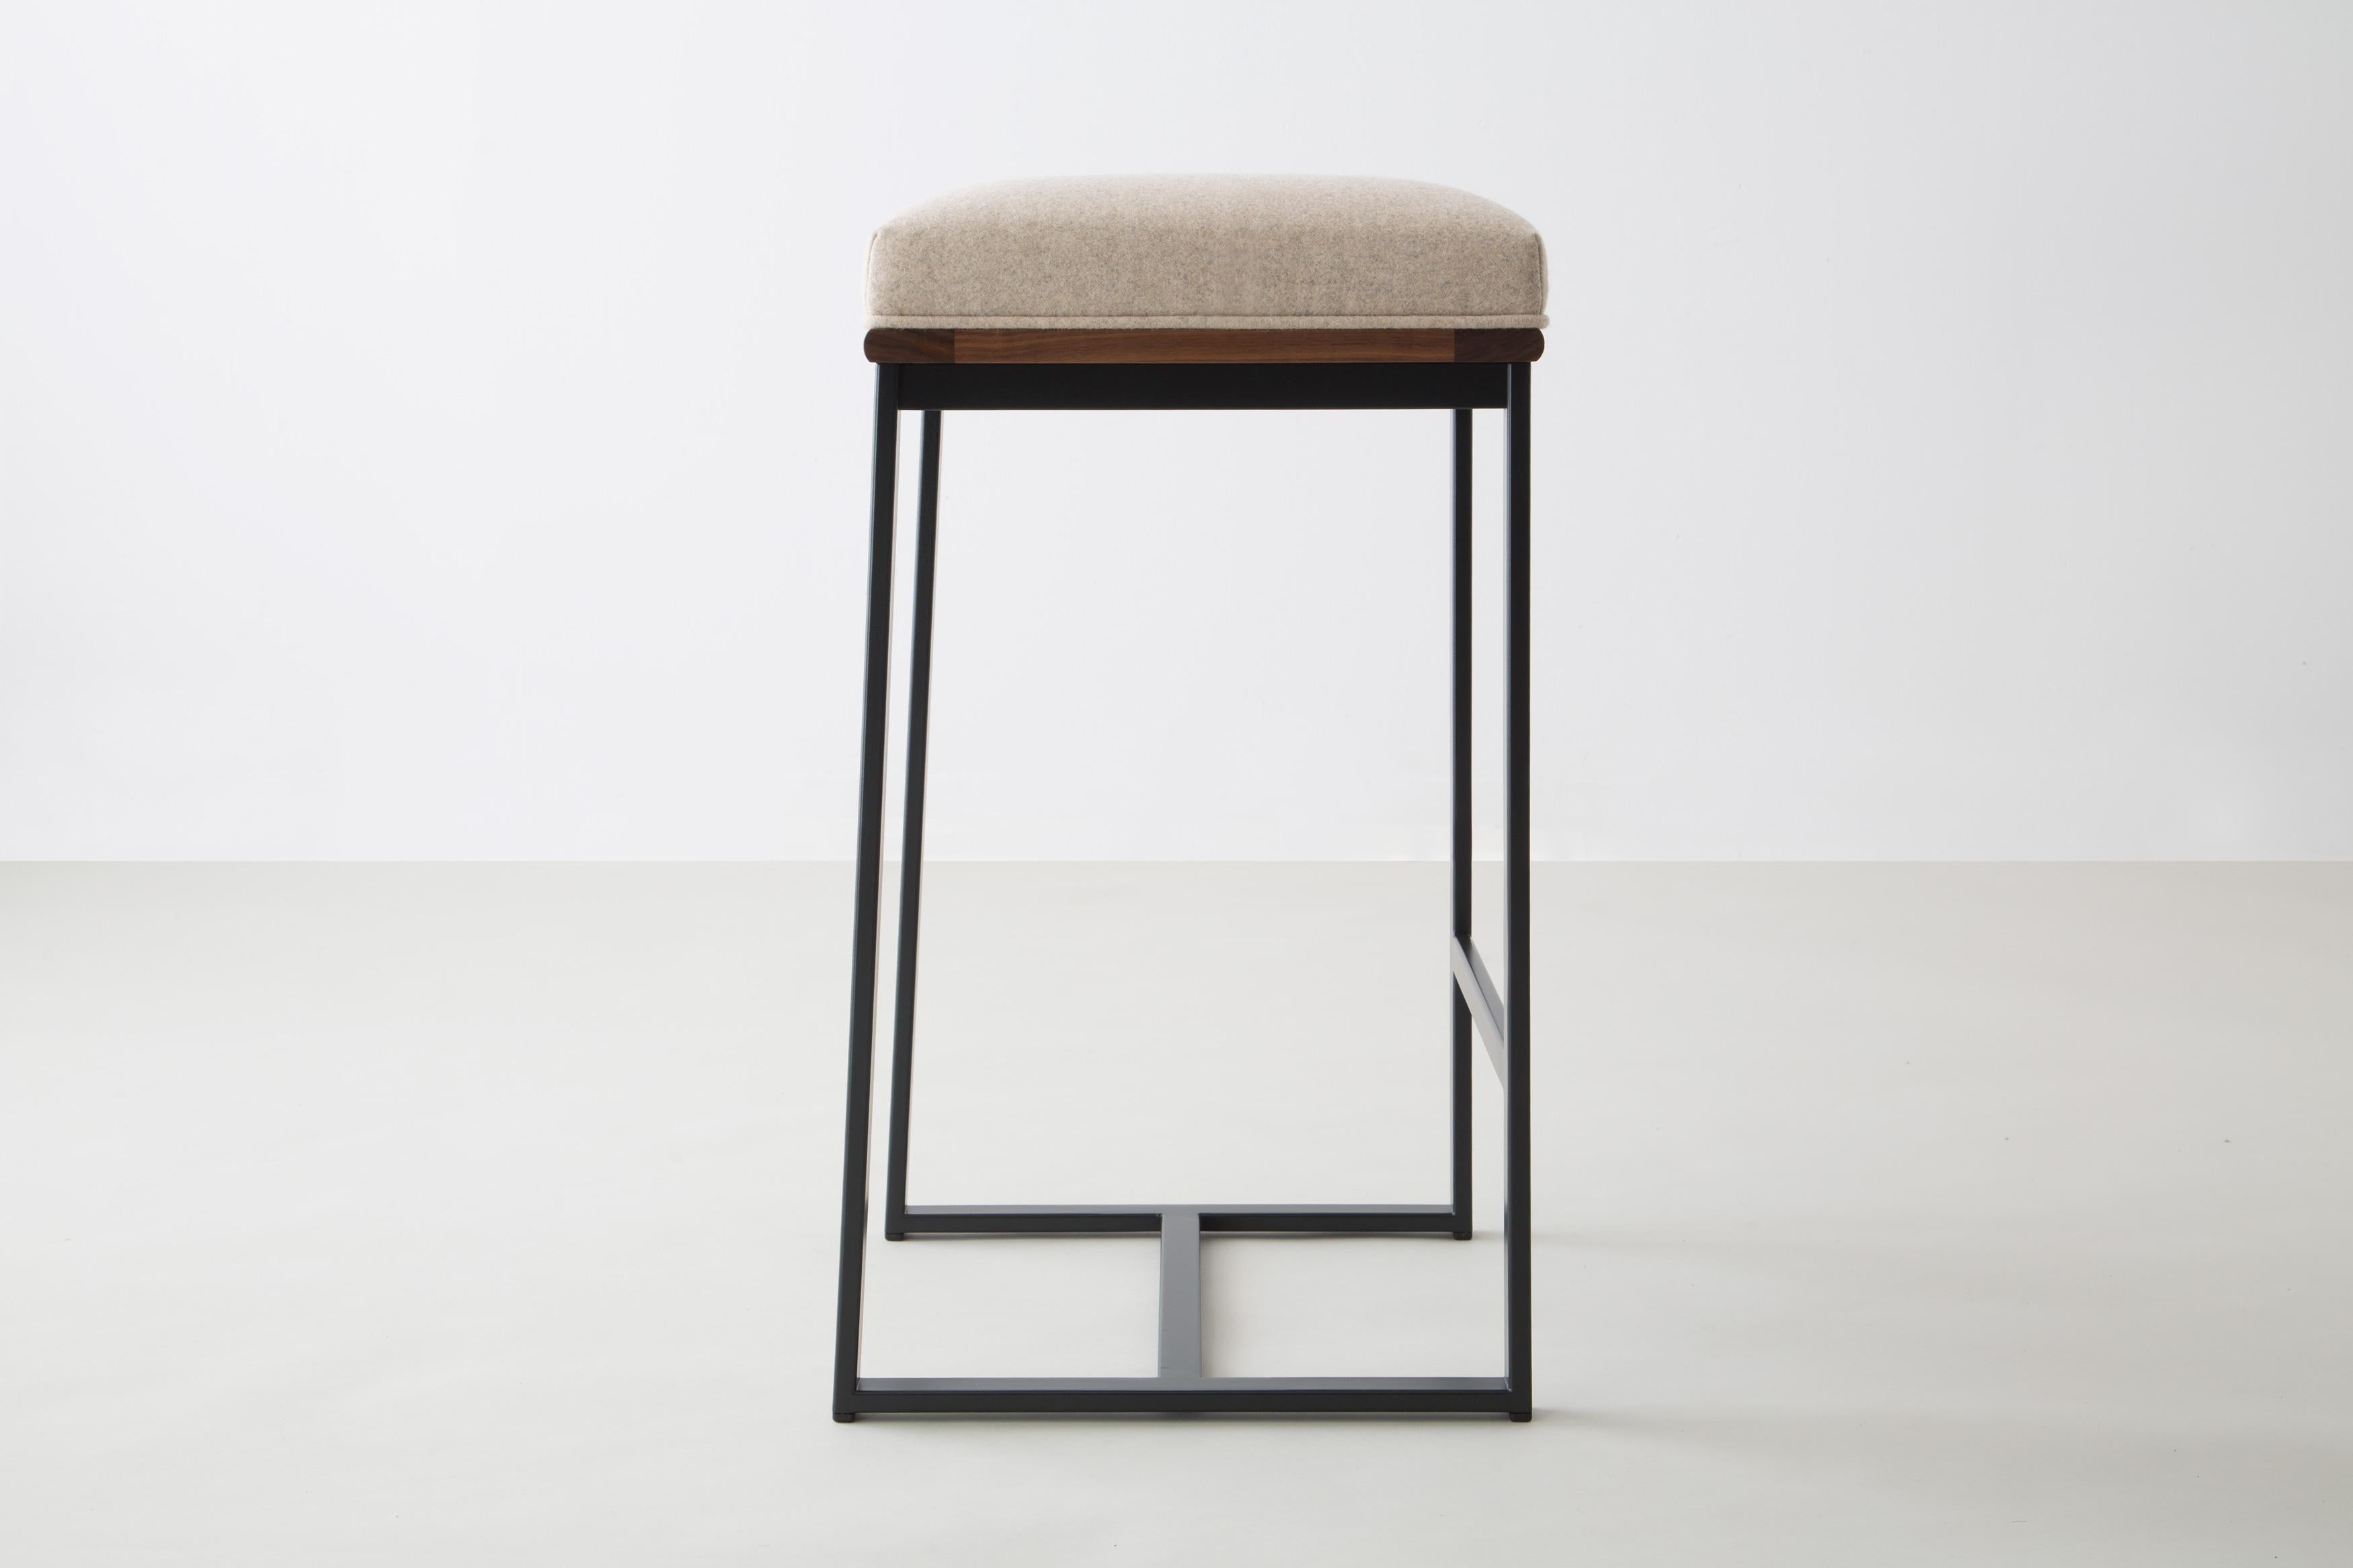 The DGD counter stool finds formality and comfort in the industrial and organic.
 
Seat frame shown in walnut and available ash, cherry, maple, or white oak

Powder coated steel frame shown in black/grey and available in any standard RAL colors.